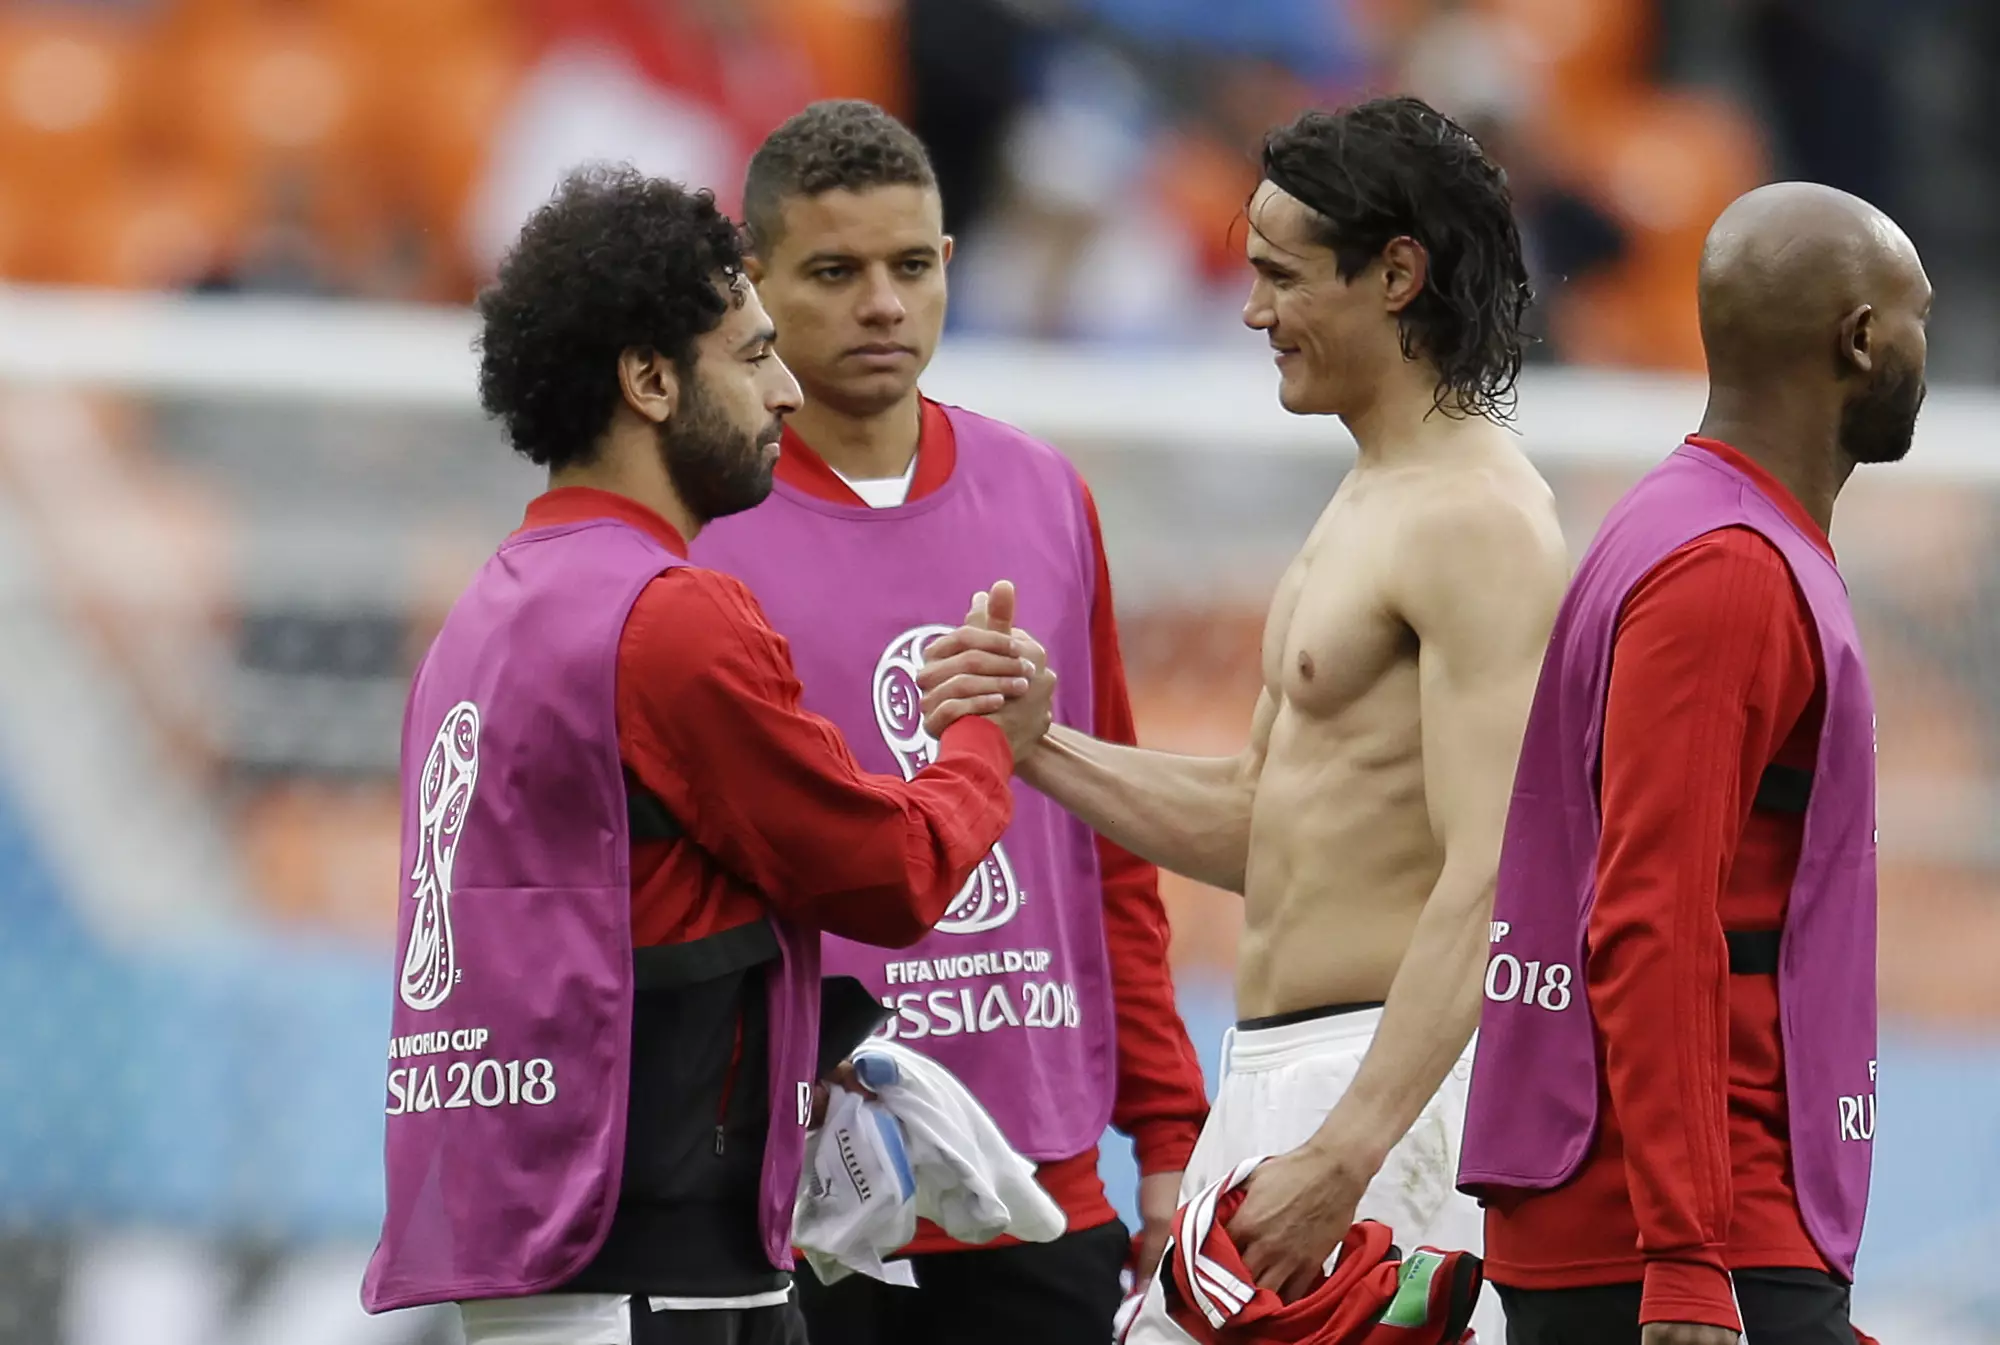 Cavani and Salah meet at the end of the game. Image: PA